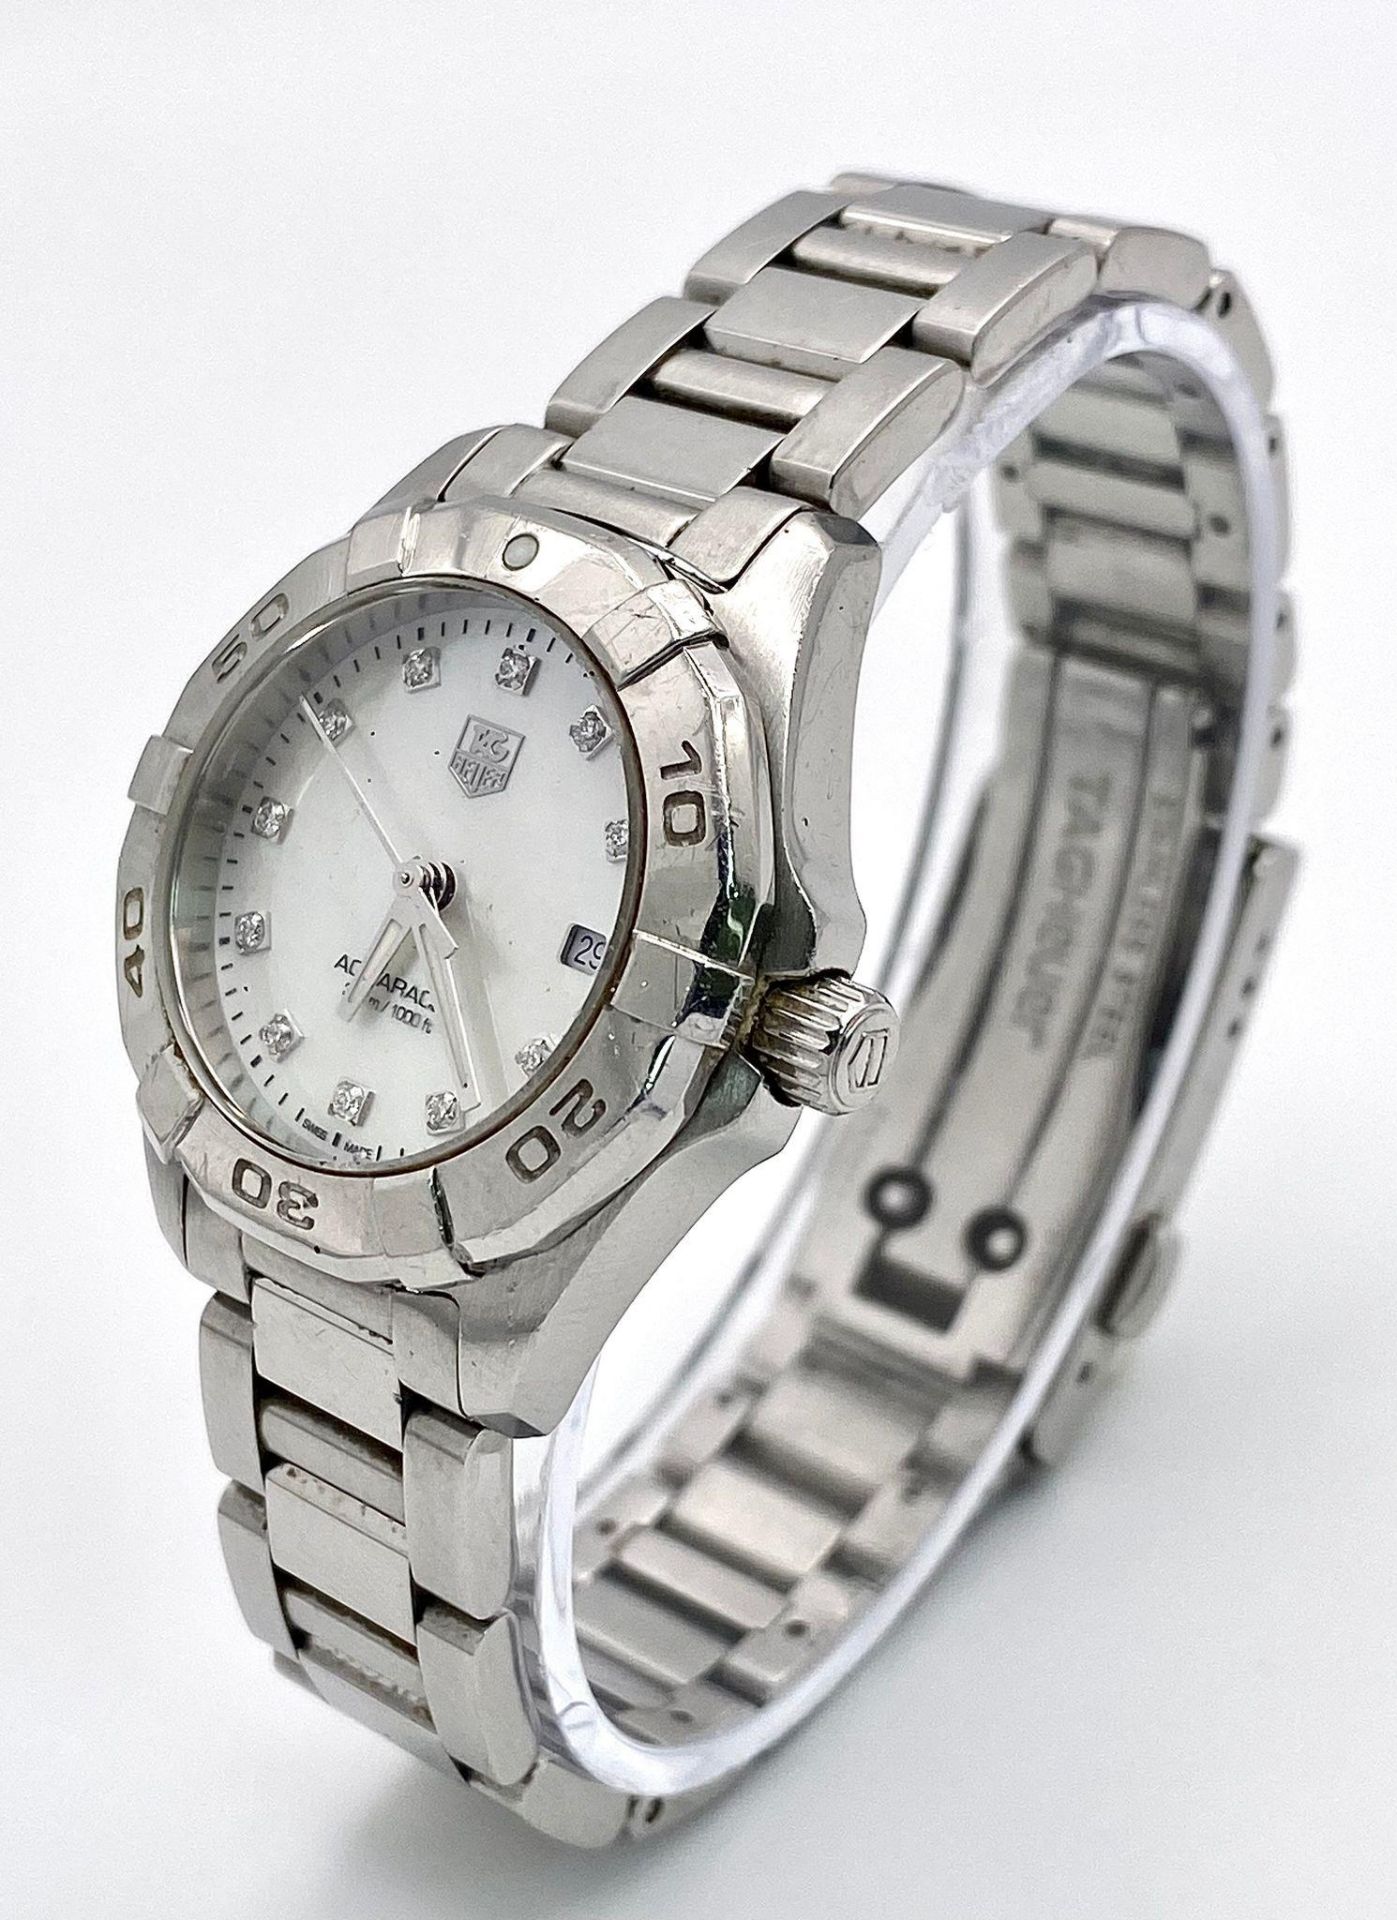 A Tag Heuer Aqua Racer Quartz Ladies Watch. Stainless steel bracelet and case - 28mm. Mother of